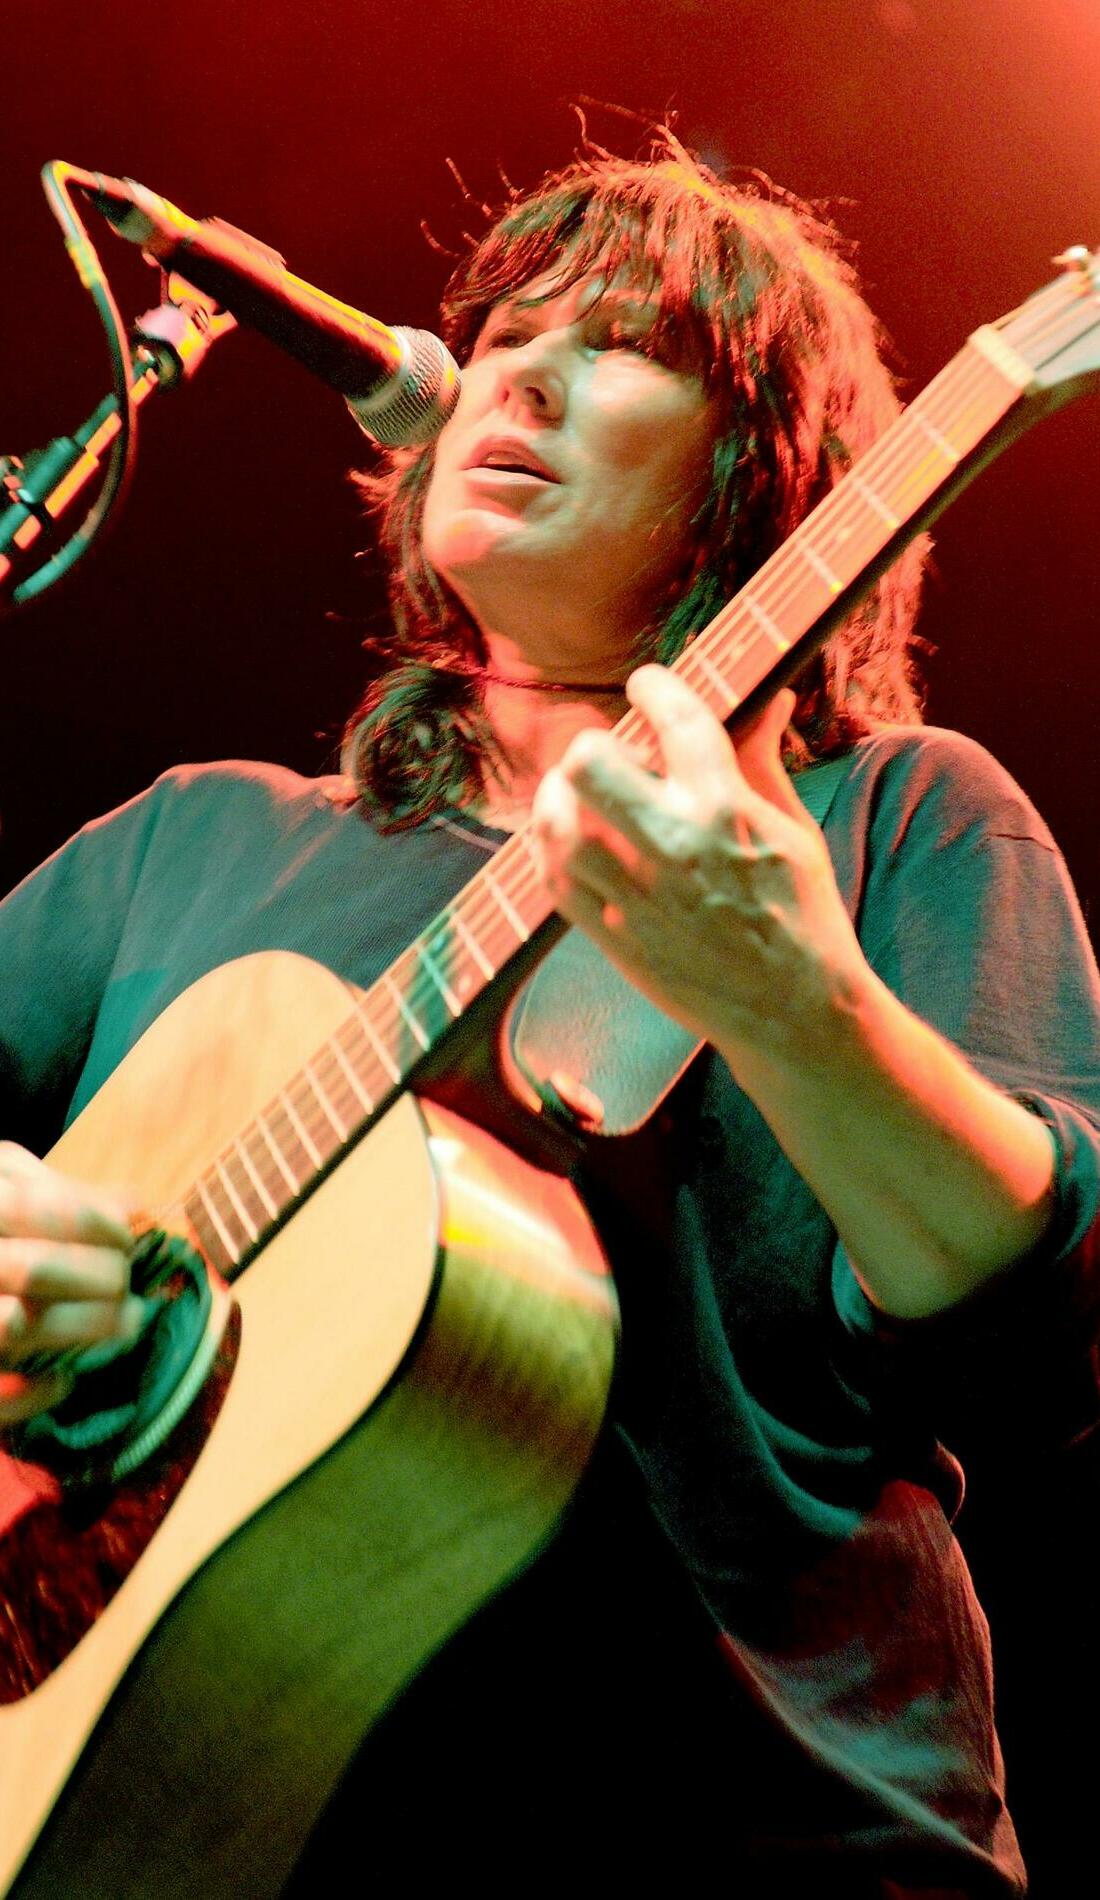 A The Breeders live event